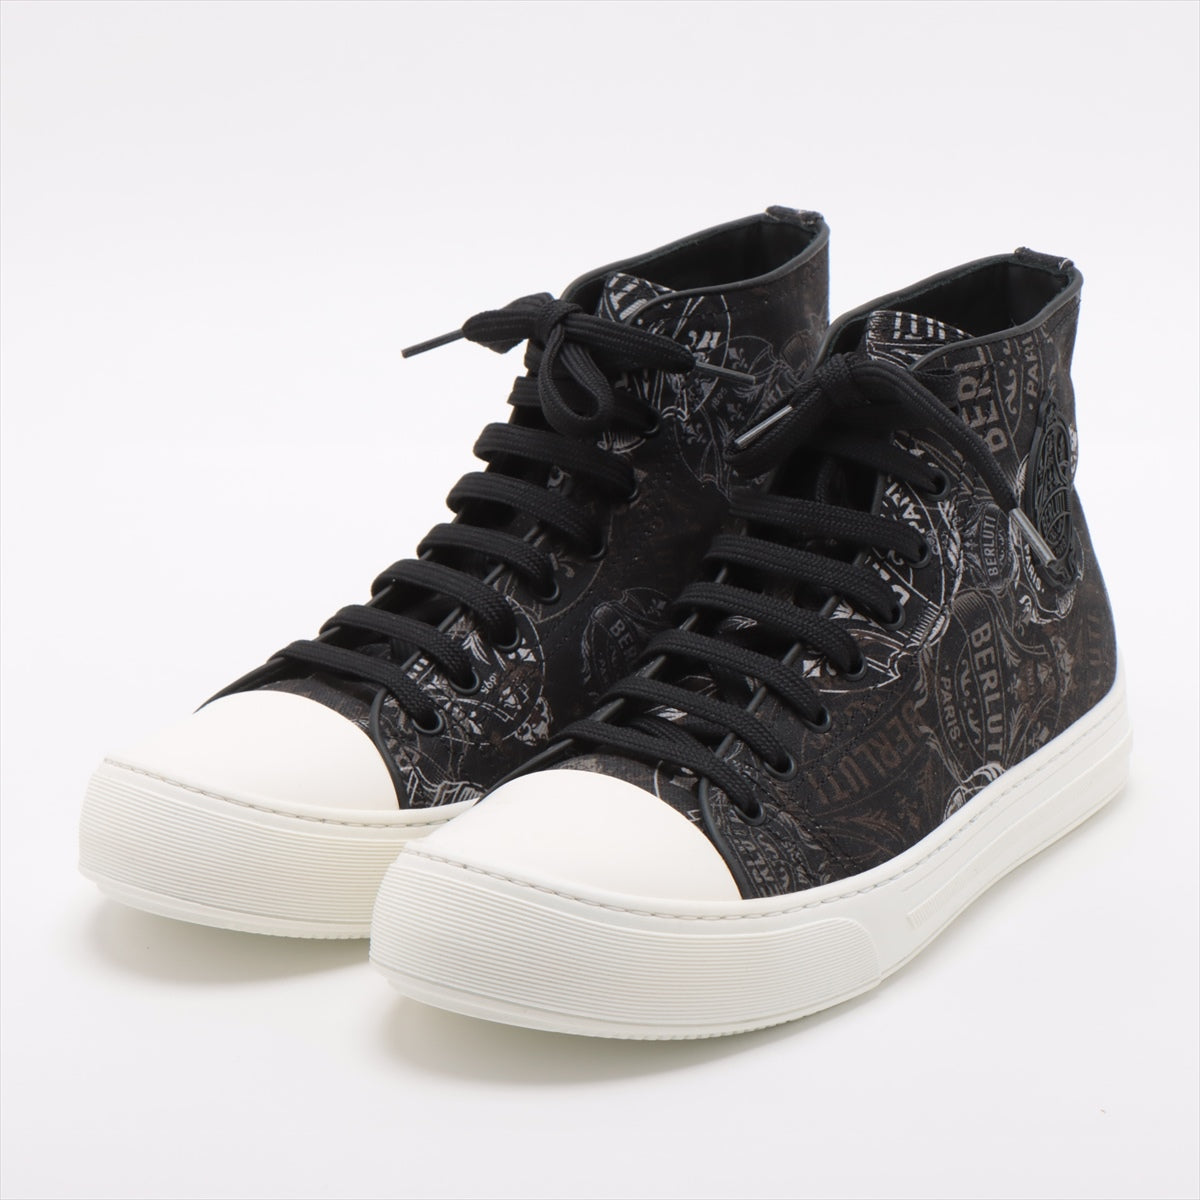 Berluti Canvas & leather High-top Sneakers 8 Men's Black 5040 playgrounds